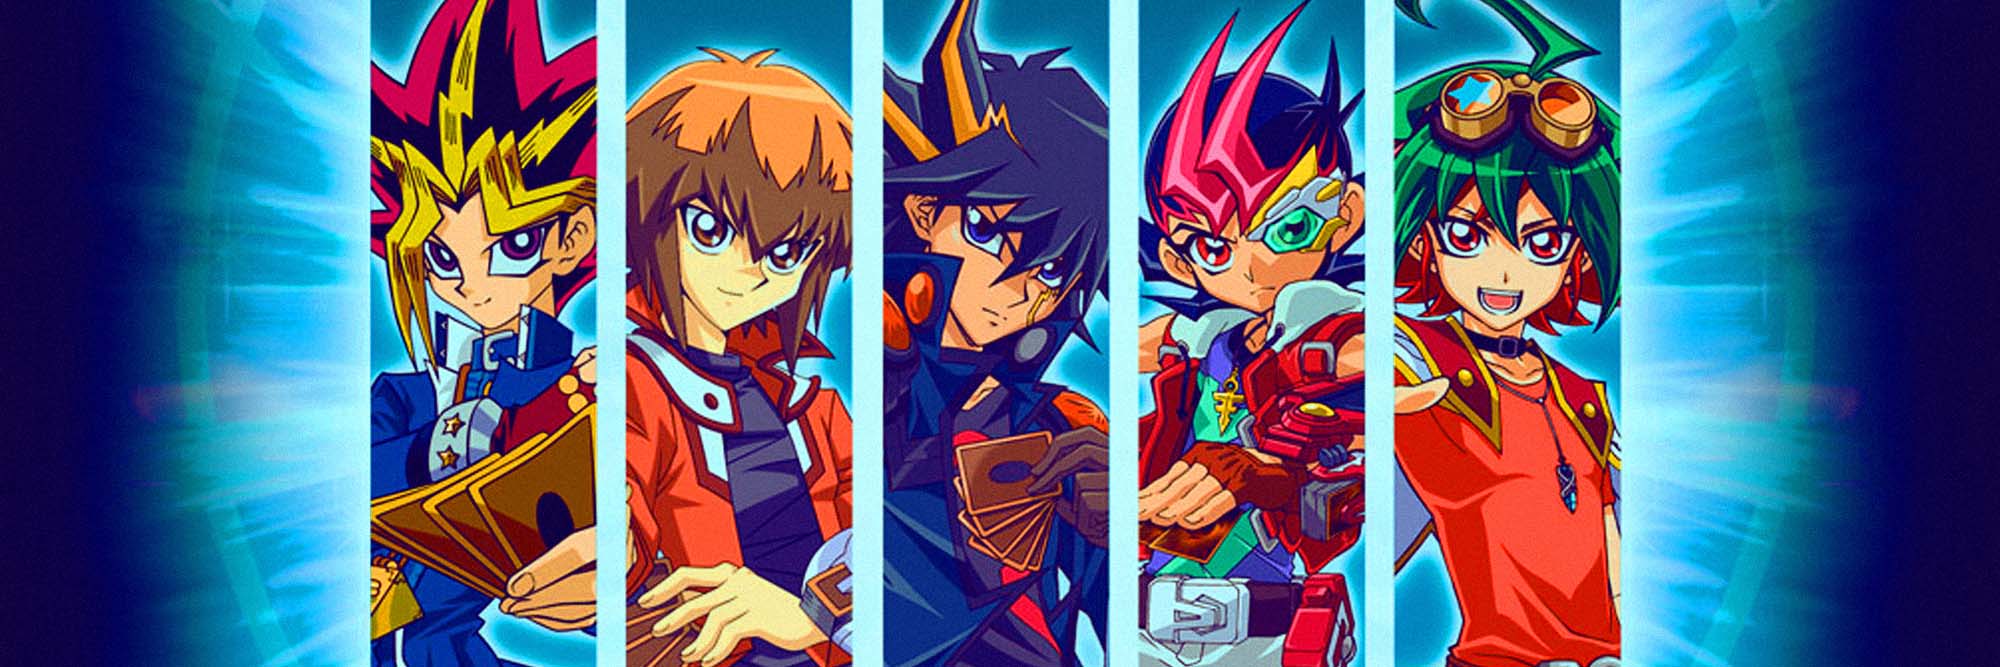 Yu-Gi-Oh!' Anime Explains Strategy In Collectible Card Game Market